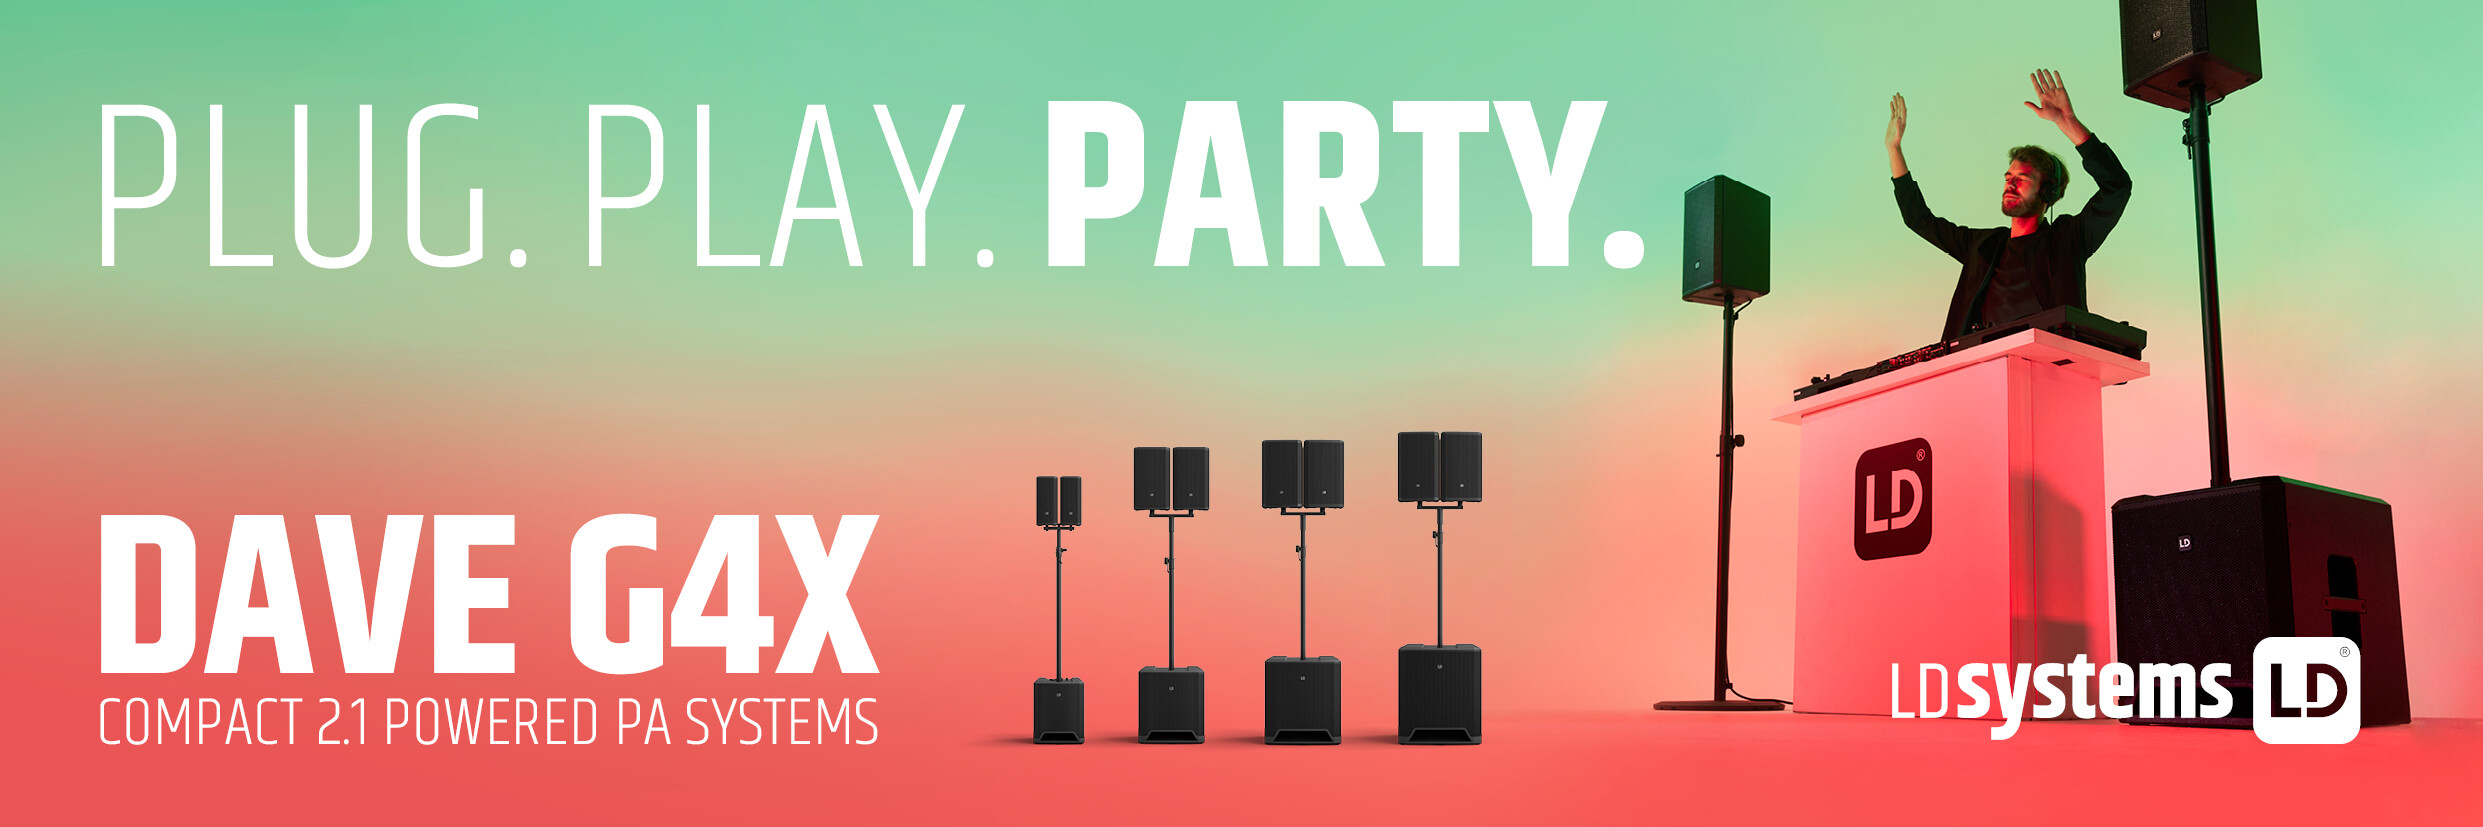 Plug. Play. Party - Dave G4X